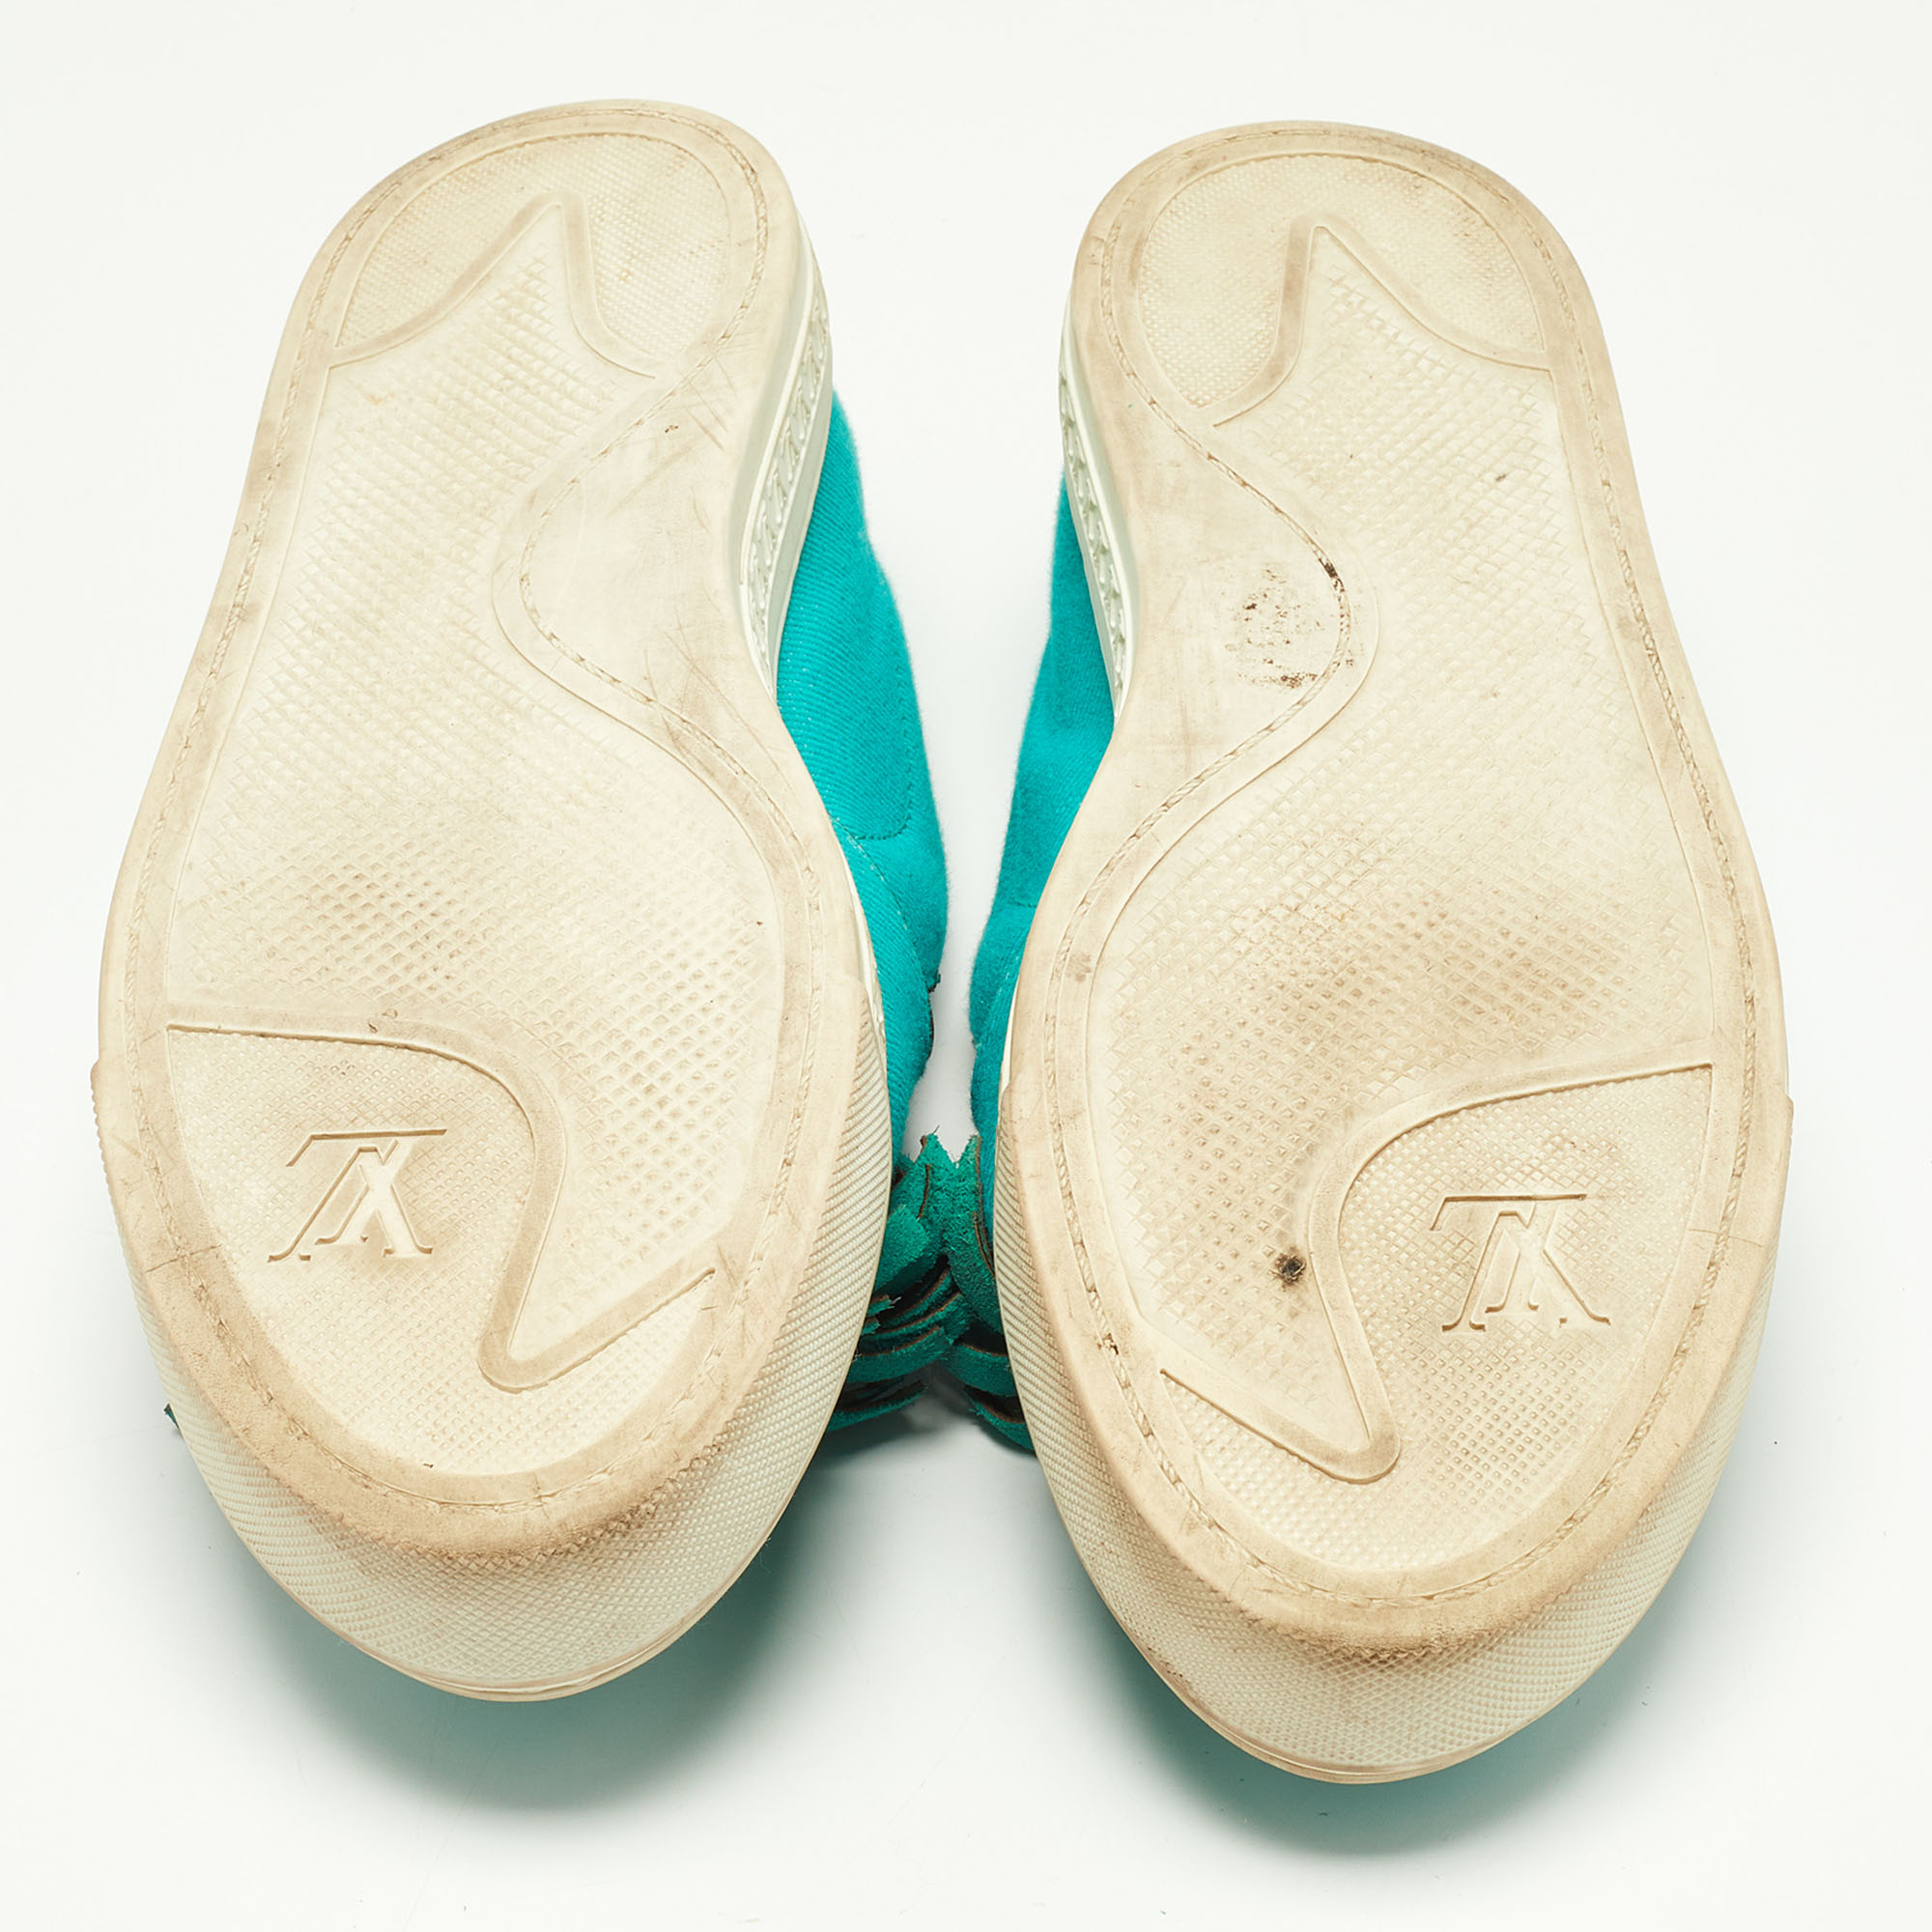 Louis Vuitton Turquoise Twill Fabric And Monogram Canvas Destination Slip On Sneakers Size 37